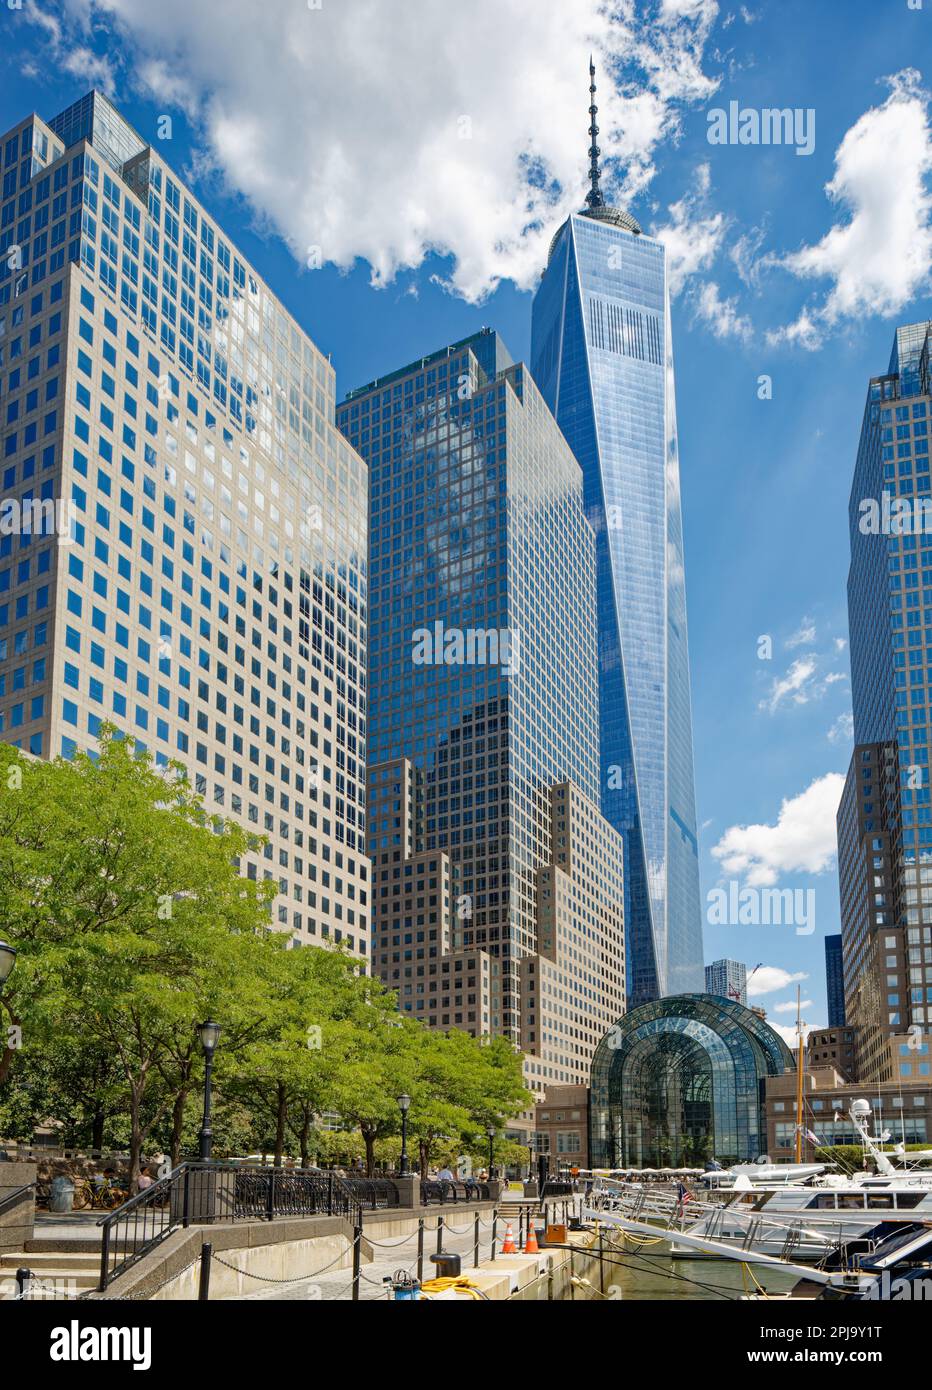 One World Trade Center towers over the buildings of Brookfield Place and World Financial Center in Manhattan’s Battery Park City. Stock Photo